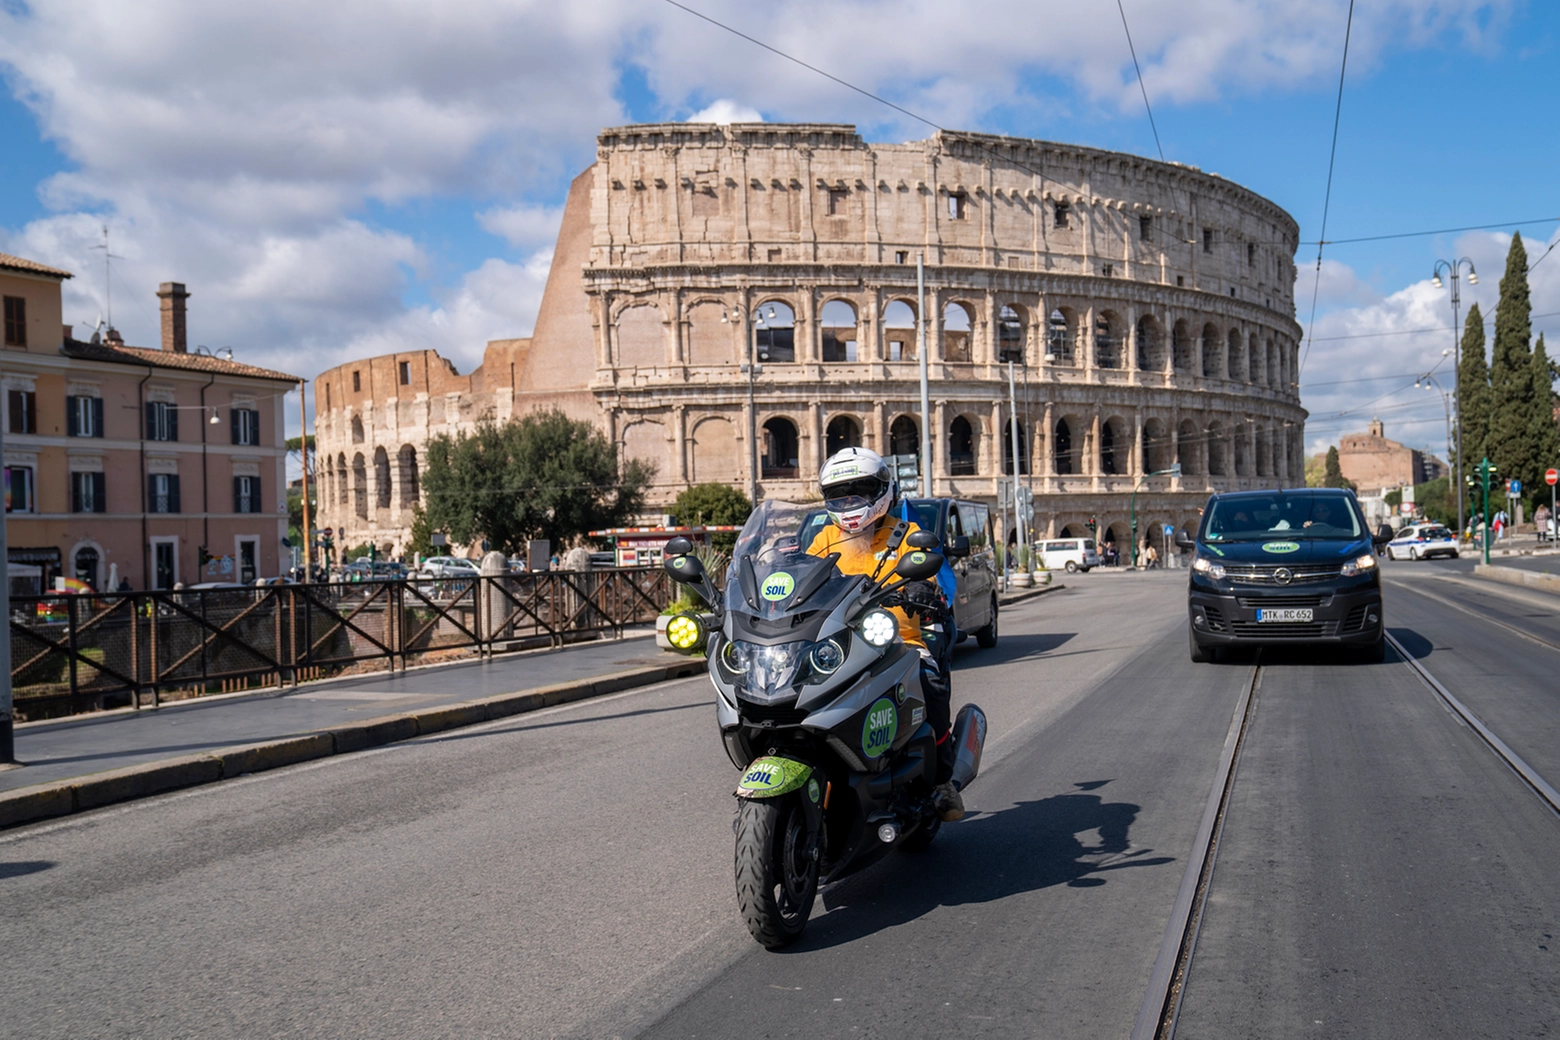 Sadhguru on a motorcycle in Rome during a trip to Italy.